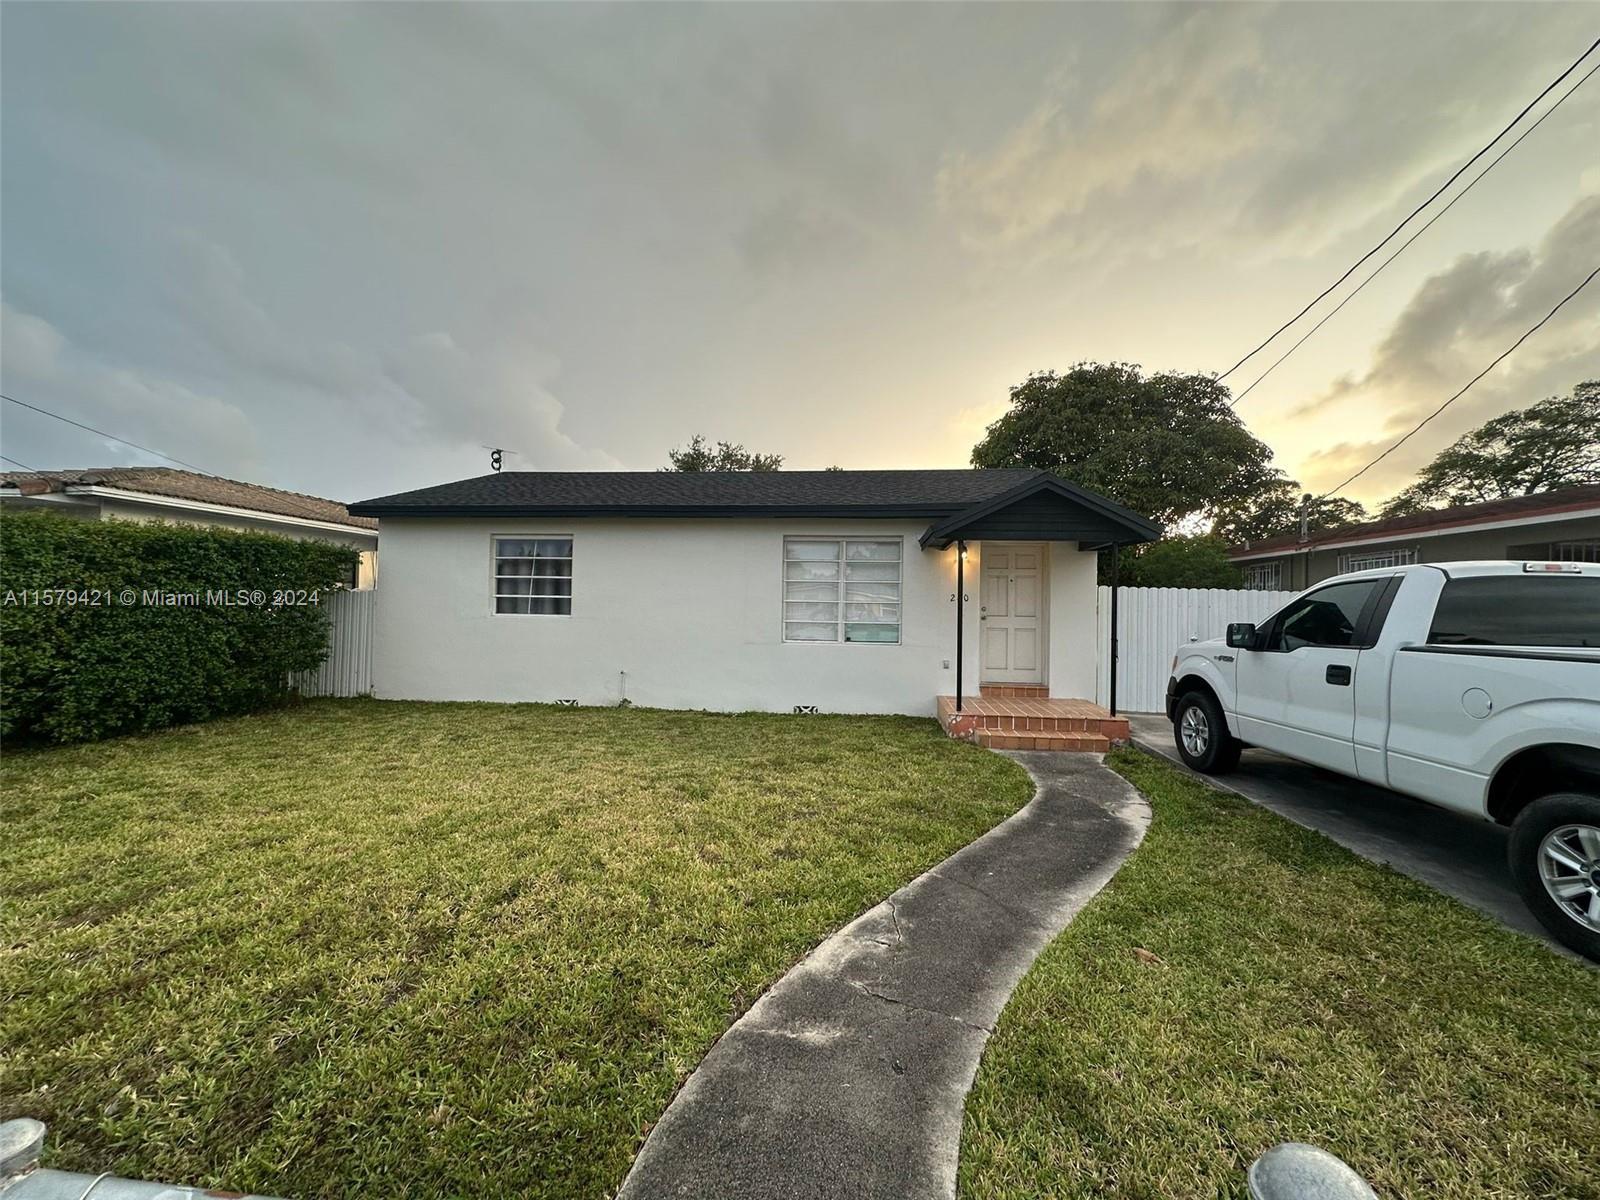 Photo of 240 NW 32nd Pl in Miami, FL